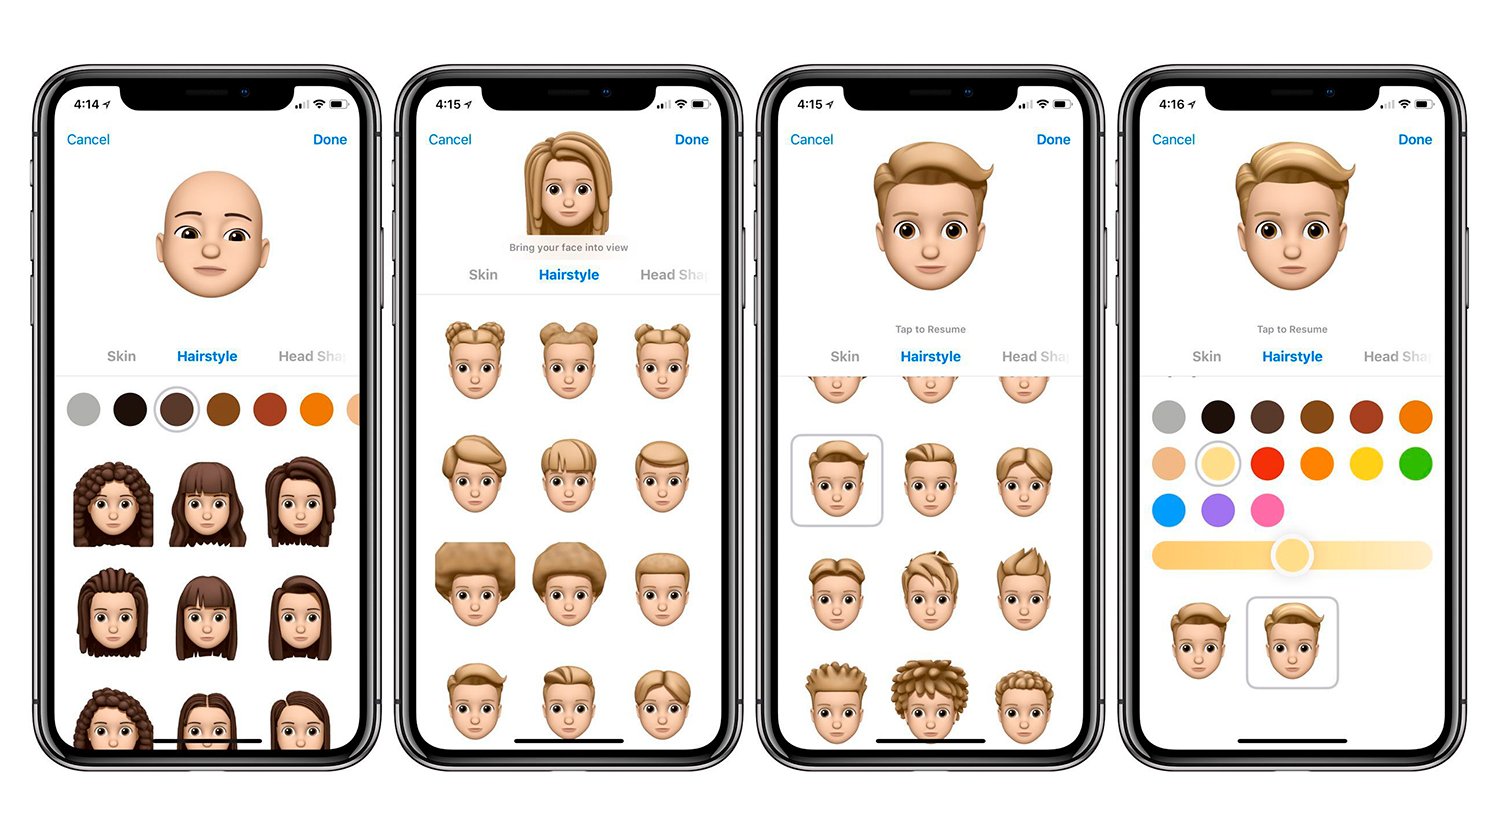 Memojis on Android and iOS: what they are and how to use them